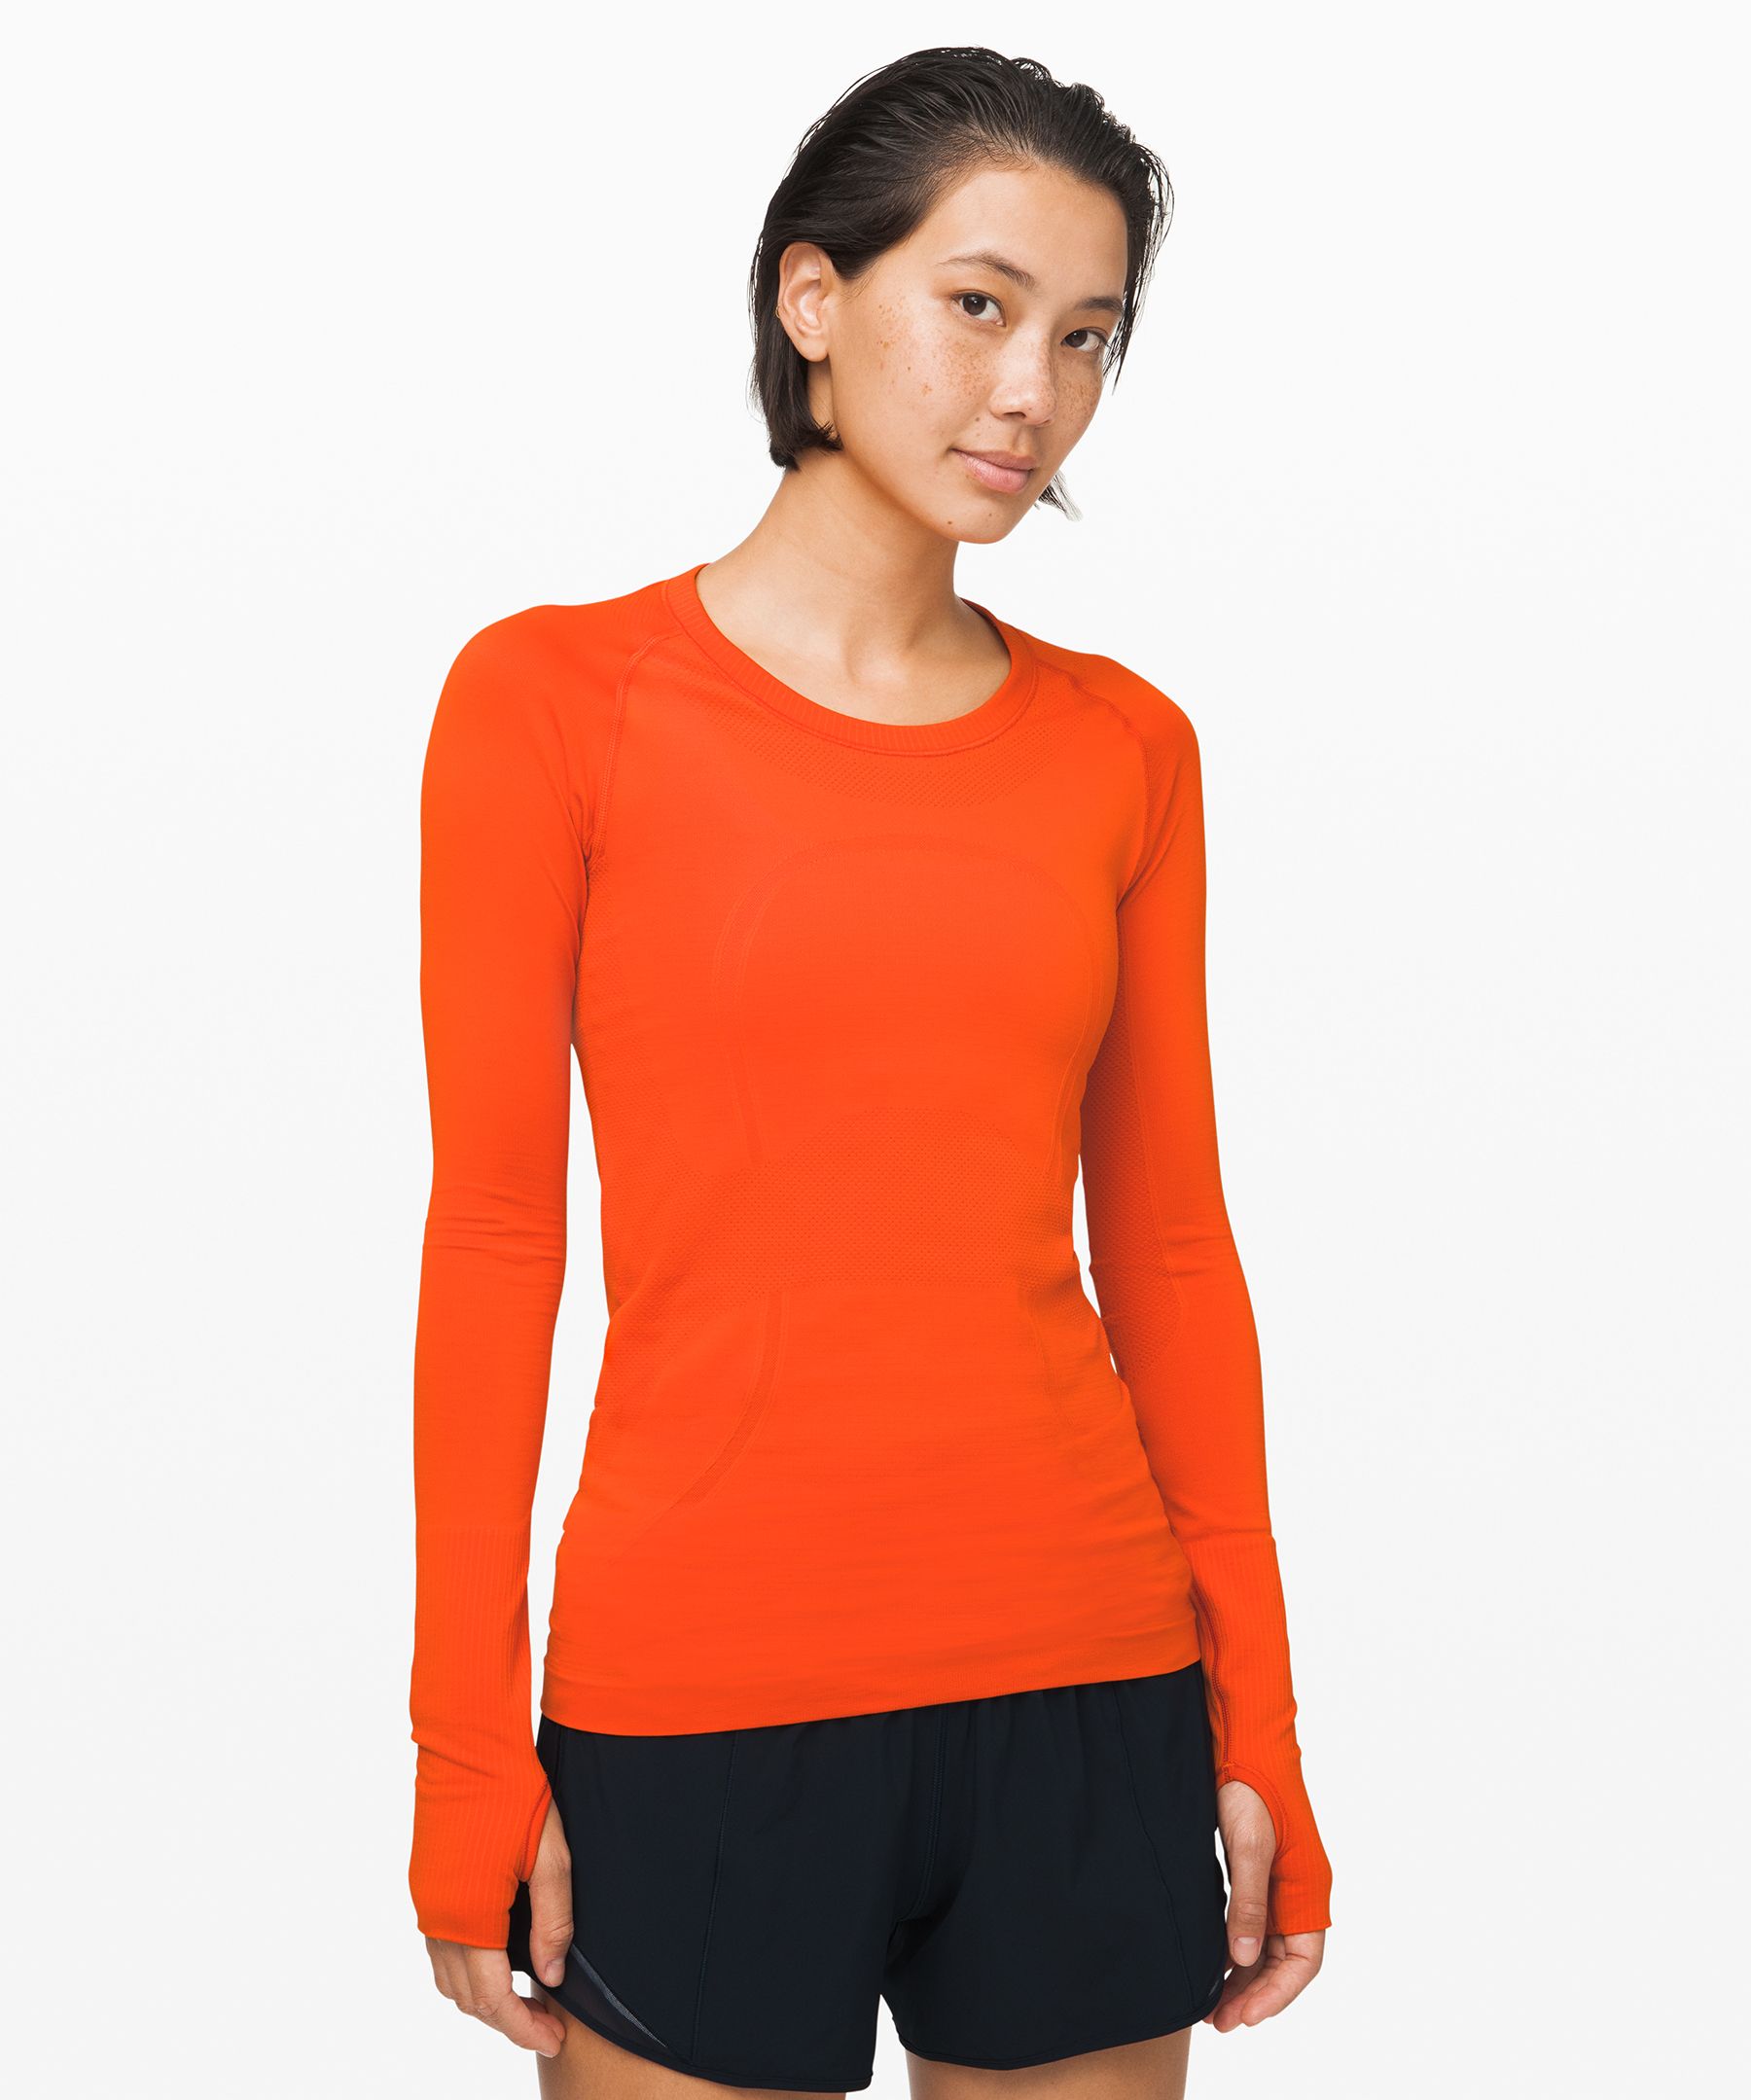 Lululemon Swiftly Tech Long Sleeve Crew In Expedition/expedition